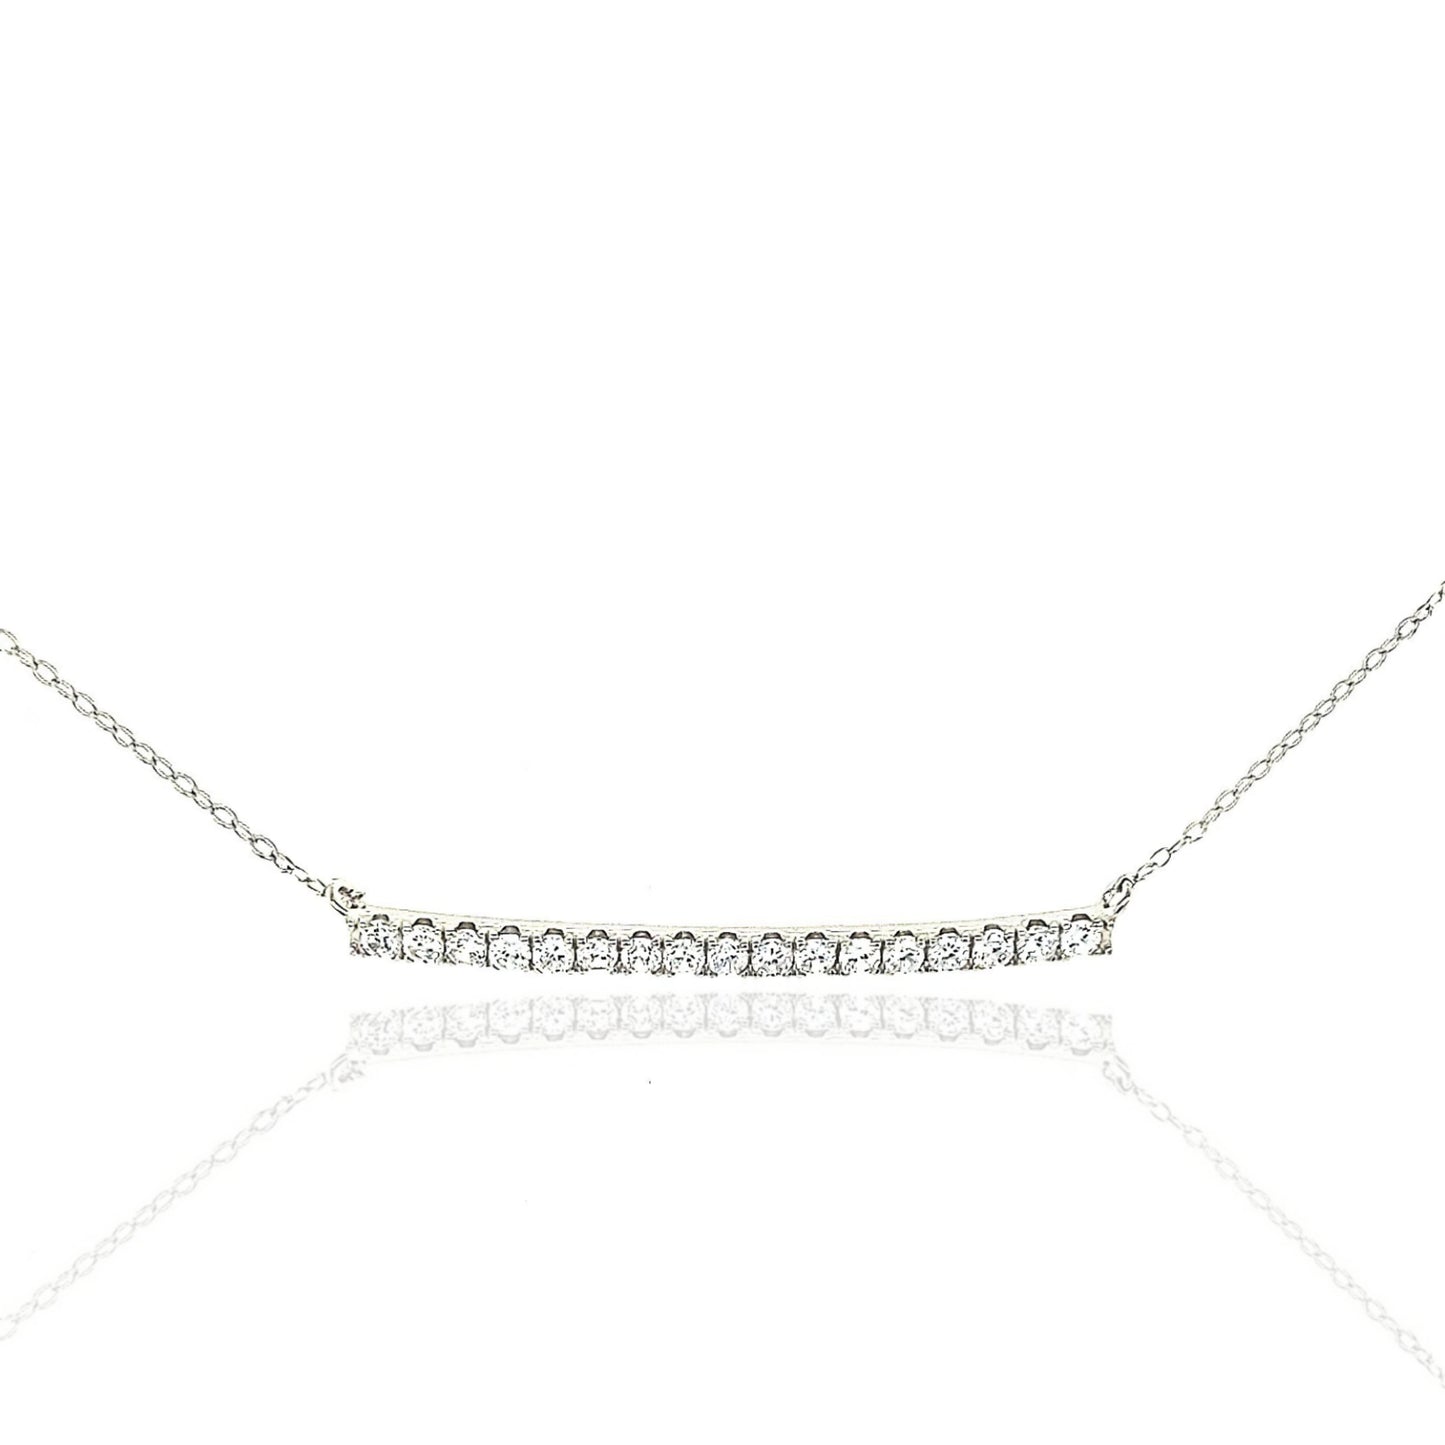 Sterling Silver One Row Bar Necklace - HK Jewels